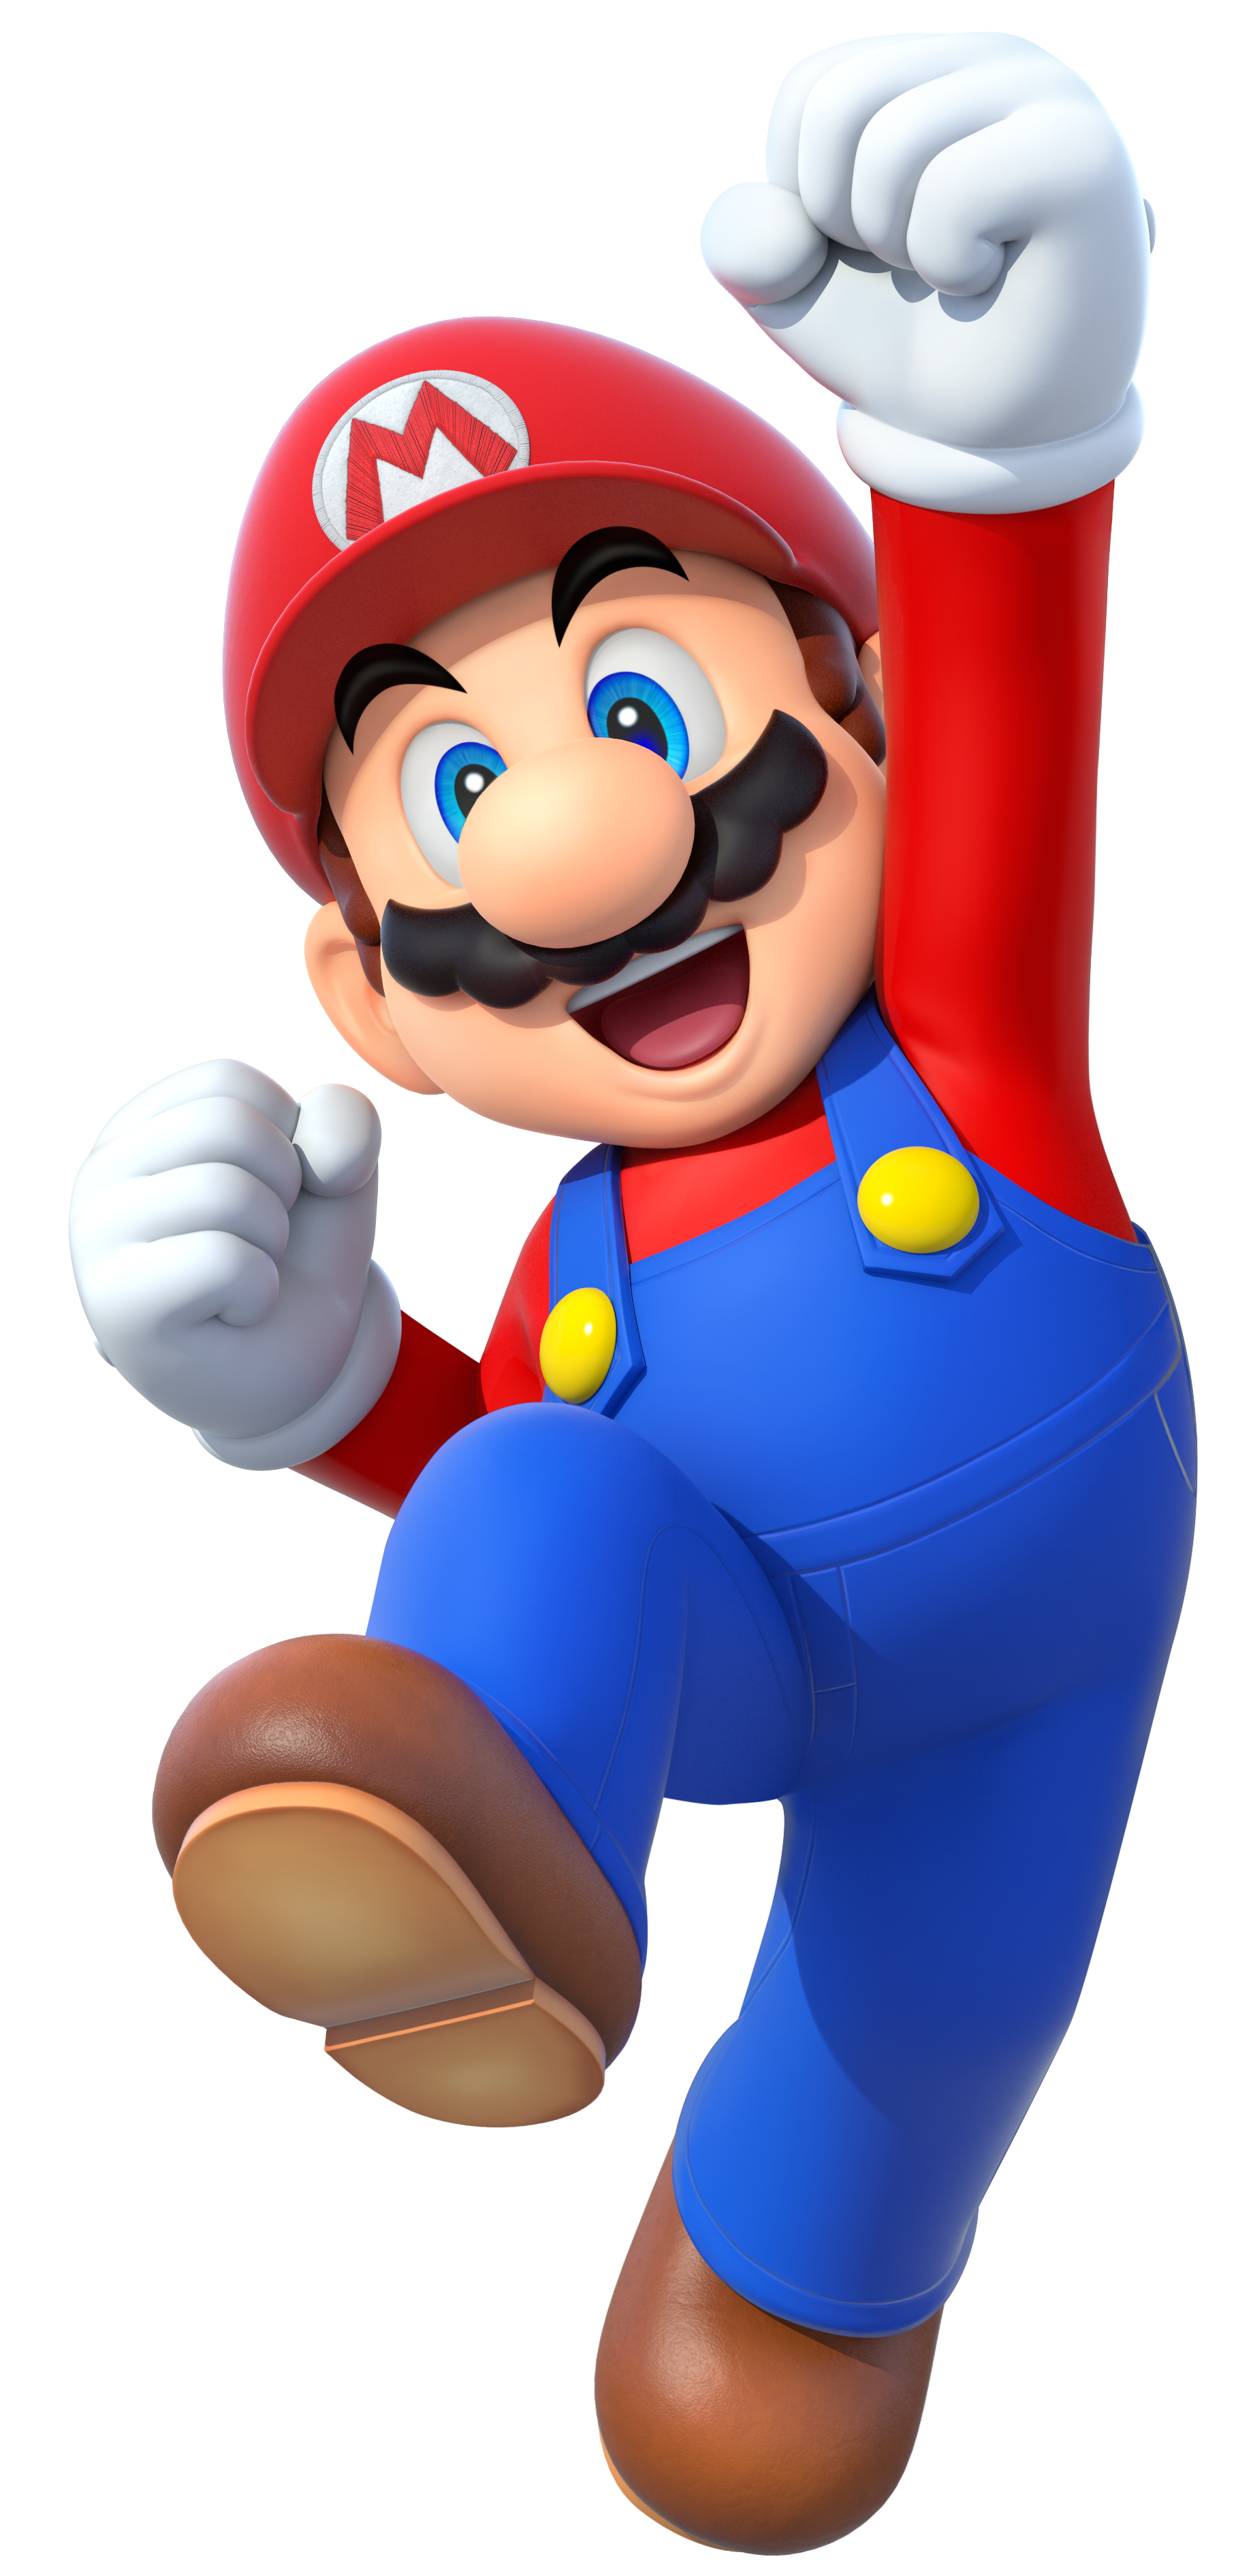 How many younger brothers does Mario have?